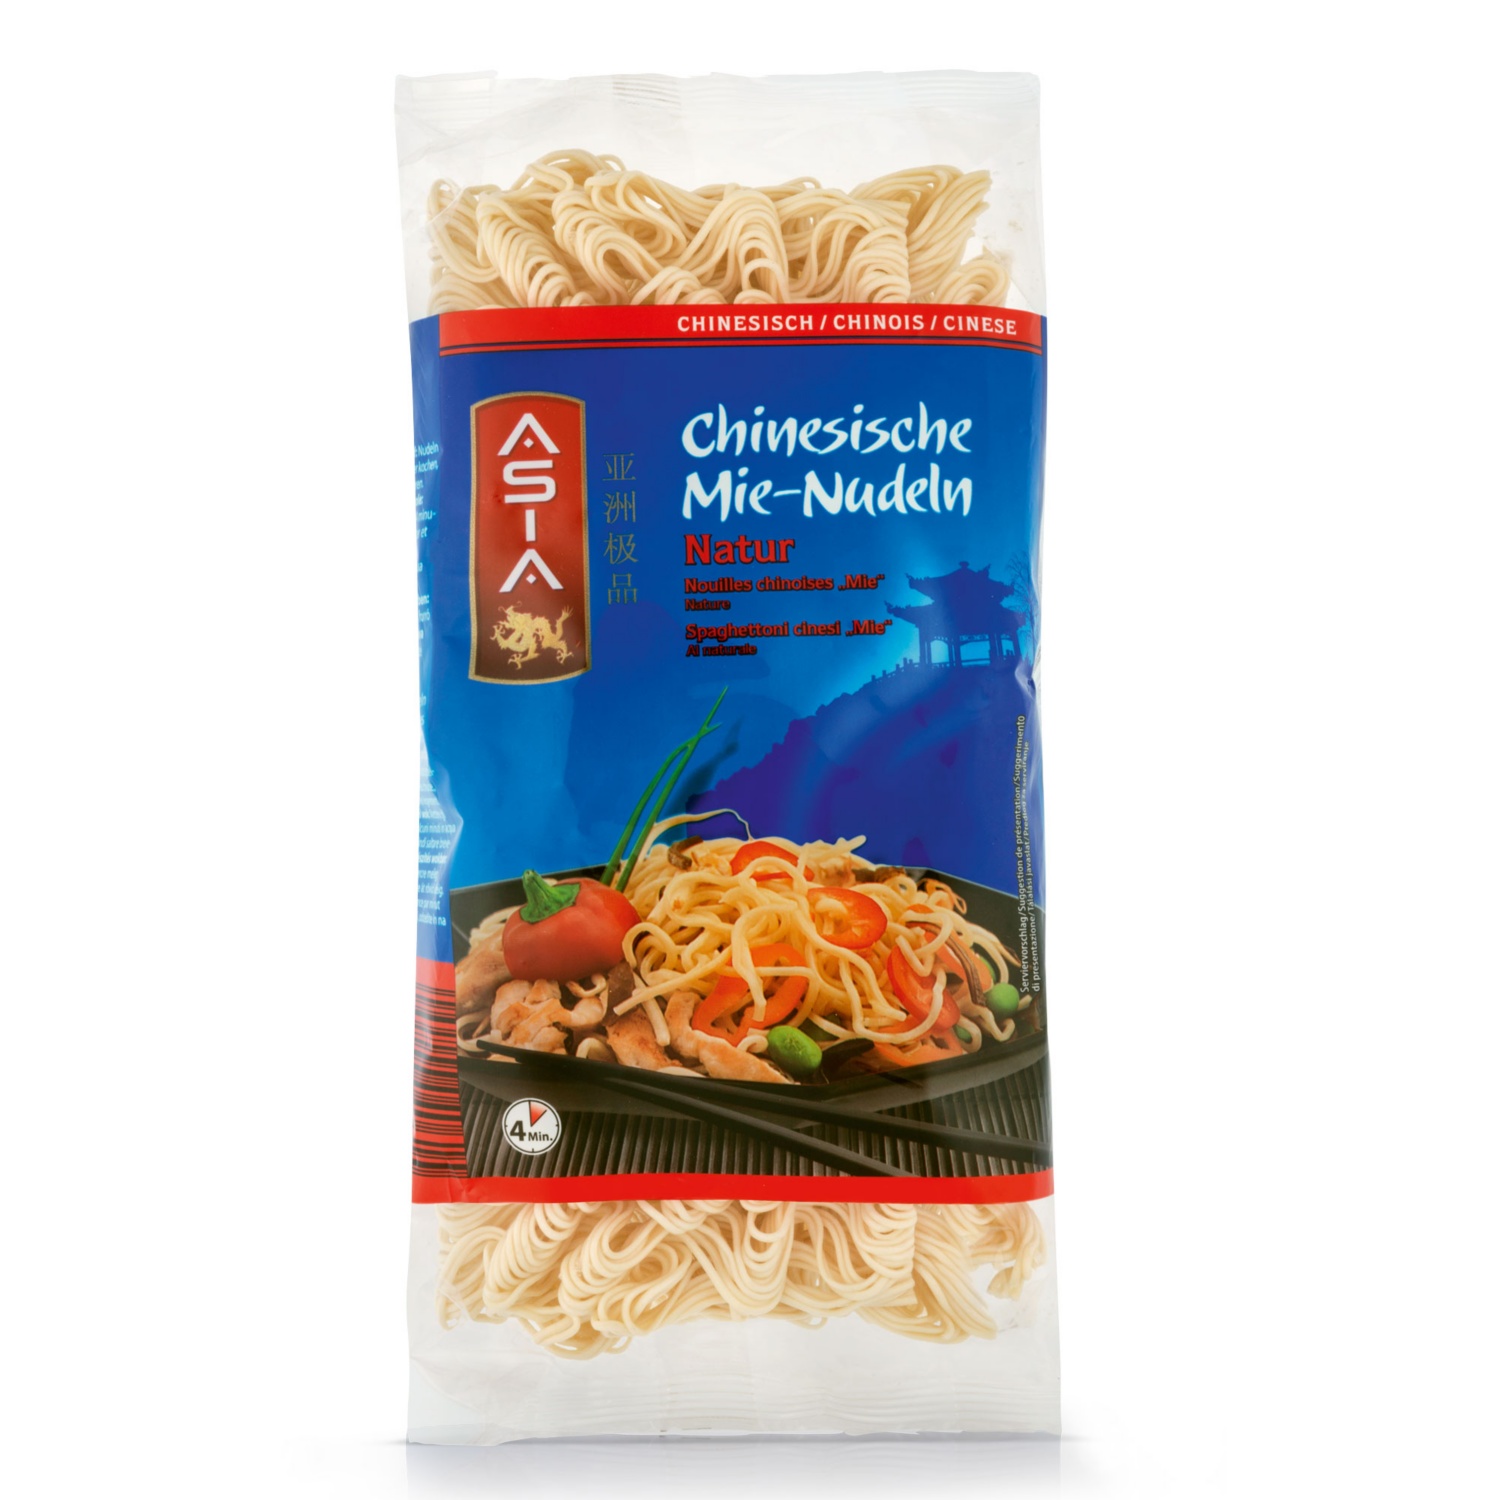 ASIA Mie-Nudeln, Natur